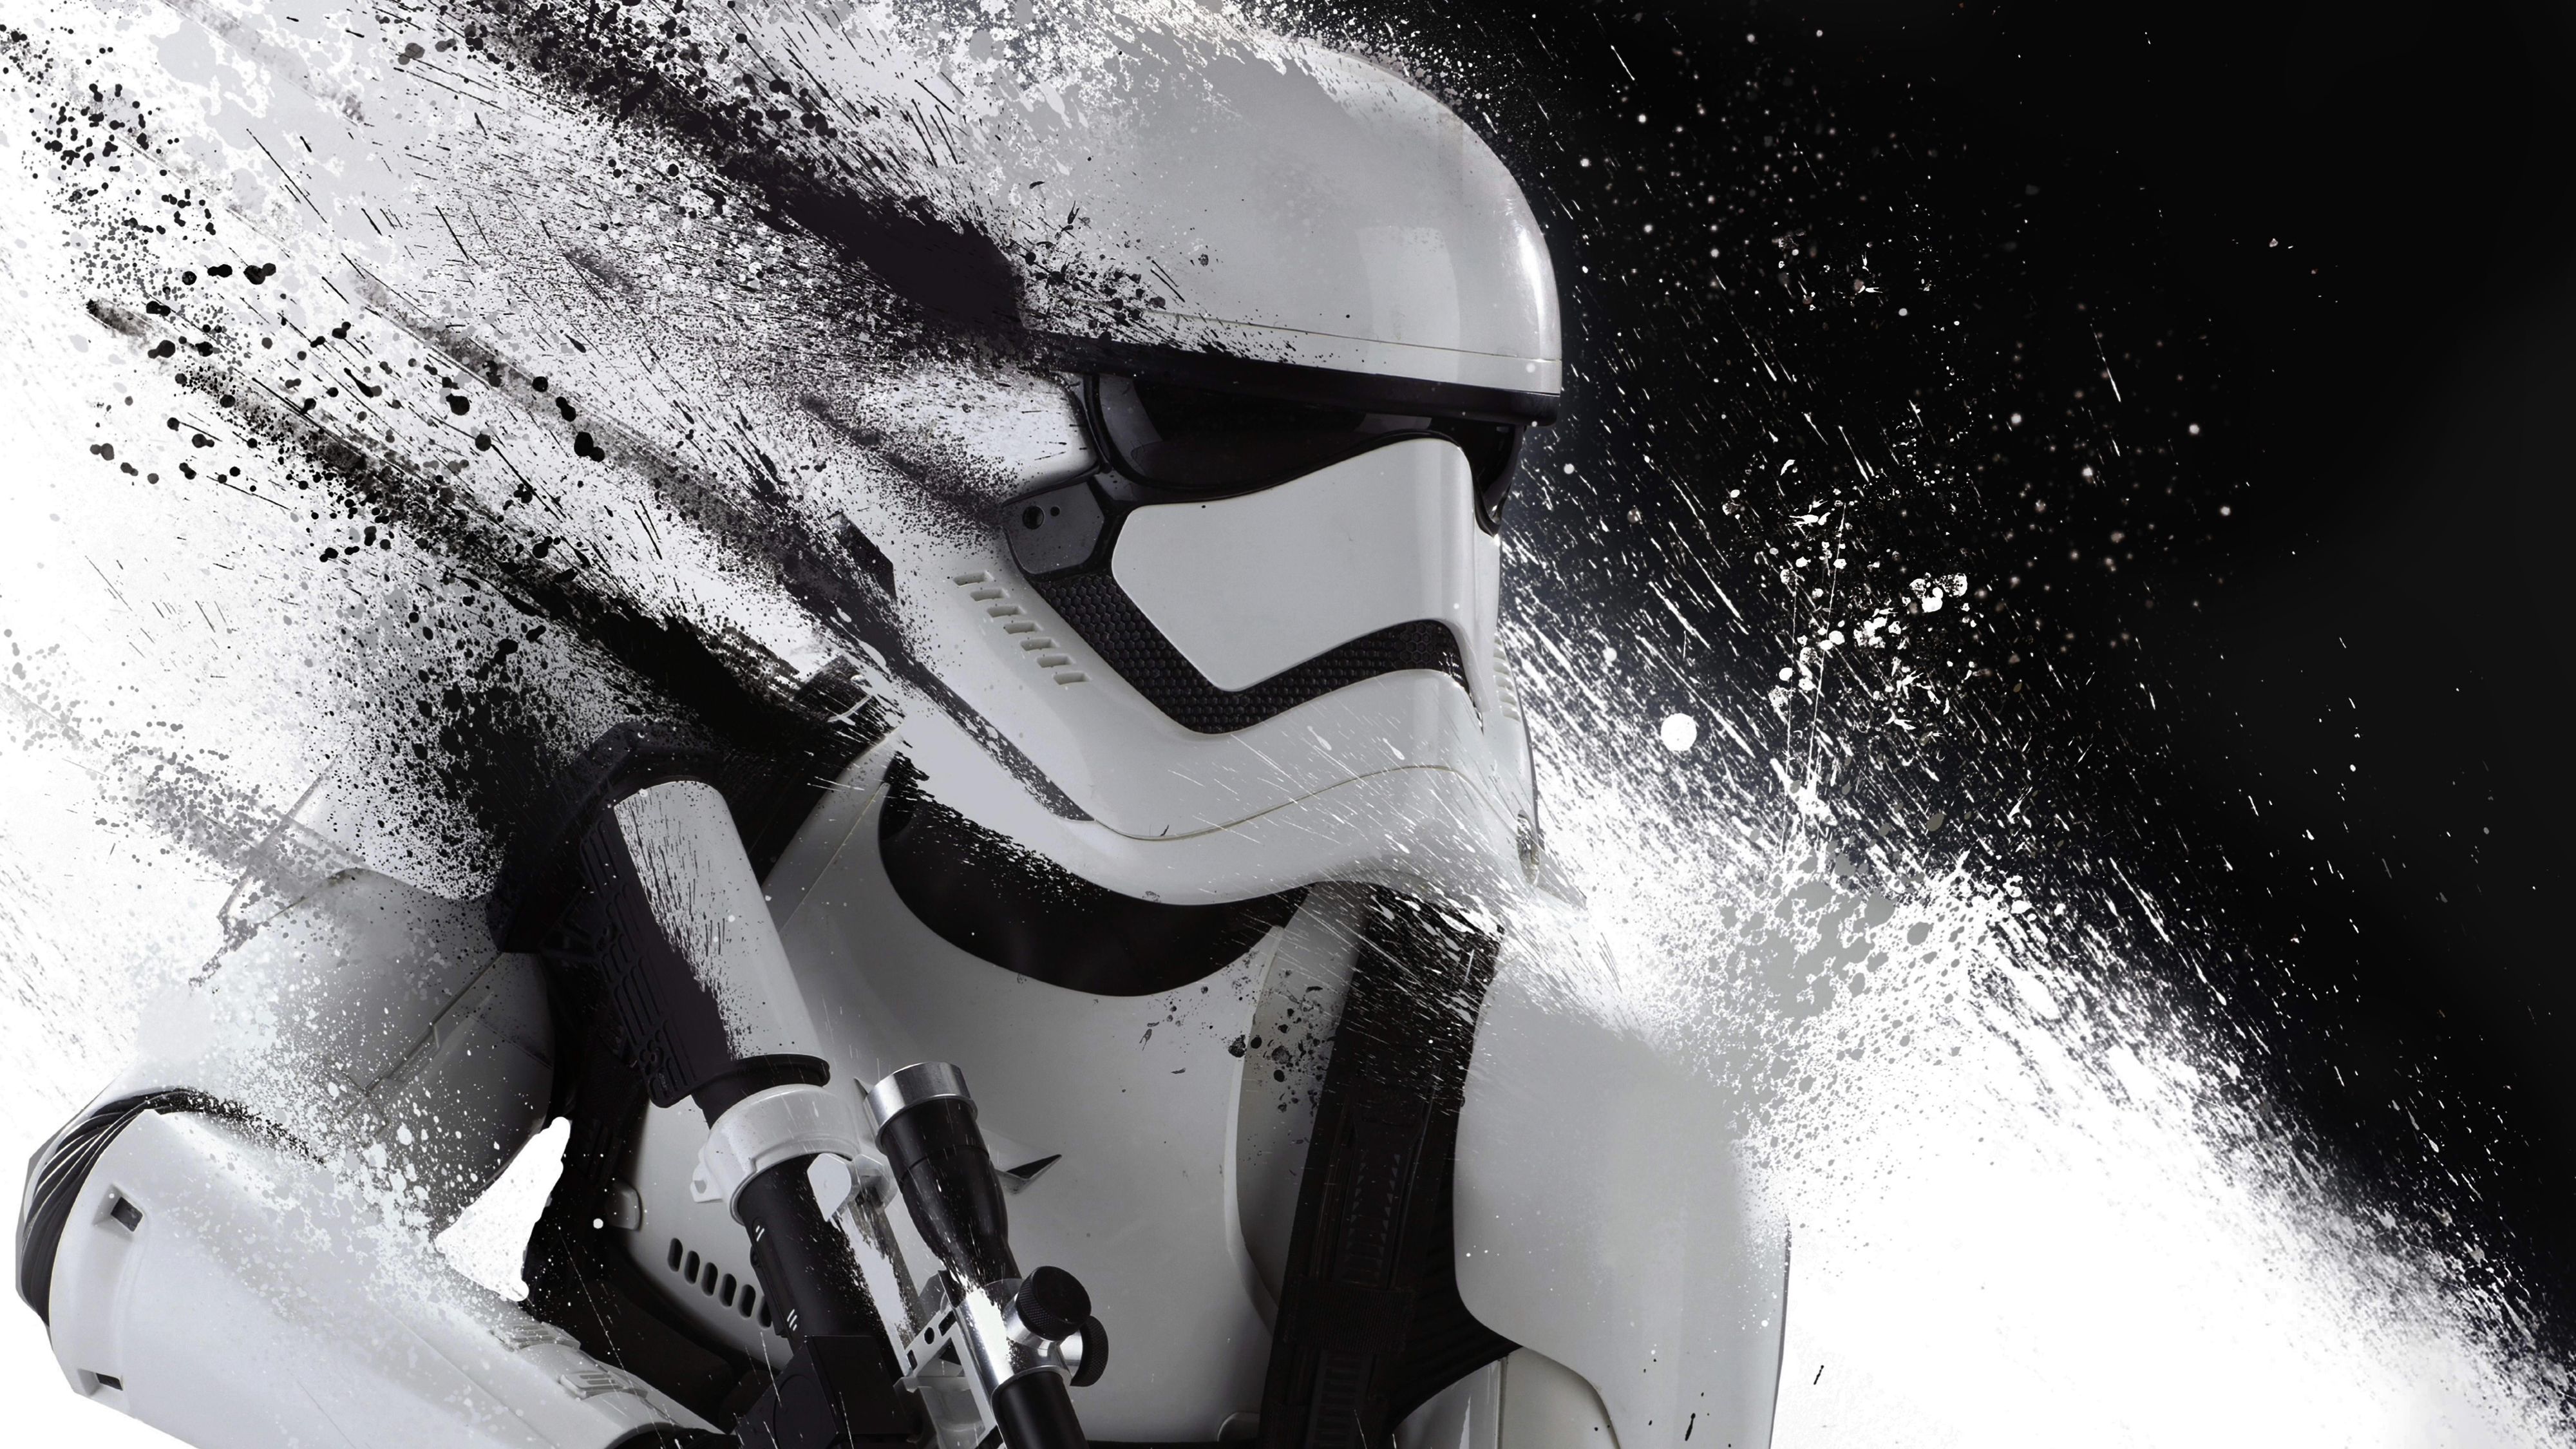 stormtrooper, star wars episode vii: the force awakens, movie Star Wars Cellphone FHD pic